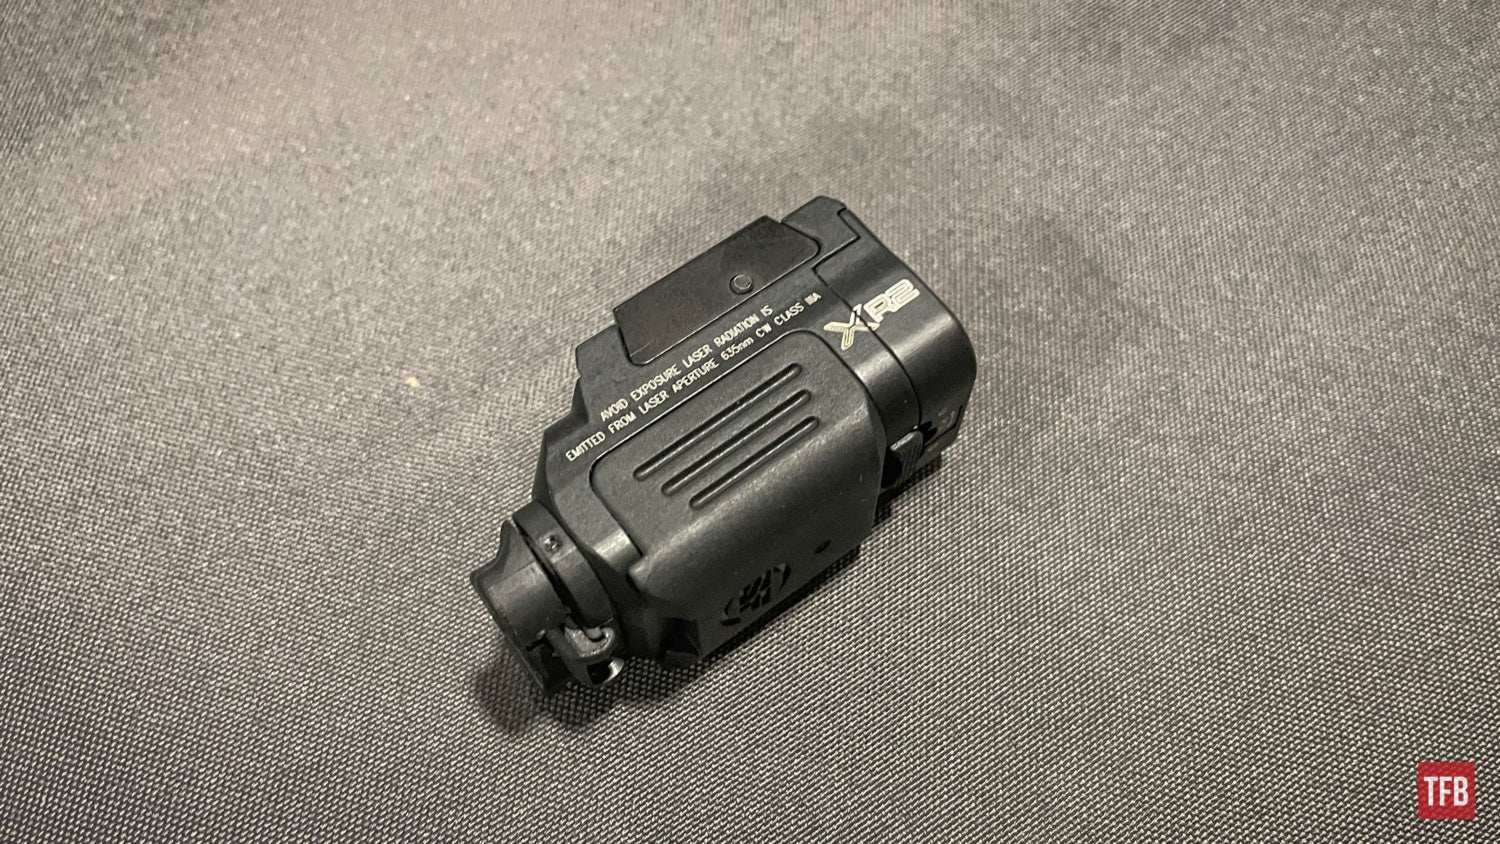 [SHOT 2024] New SureFire: XR2 Weaponlight, Remote Switches, And Stiletto EDC Light